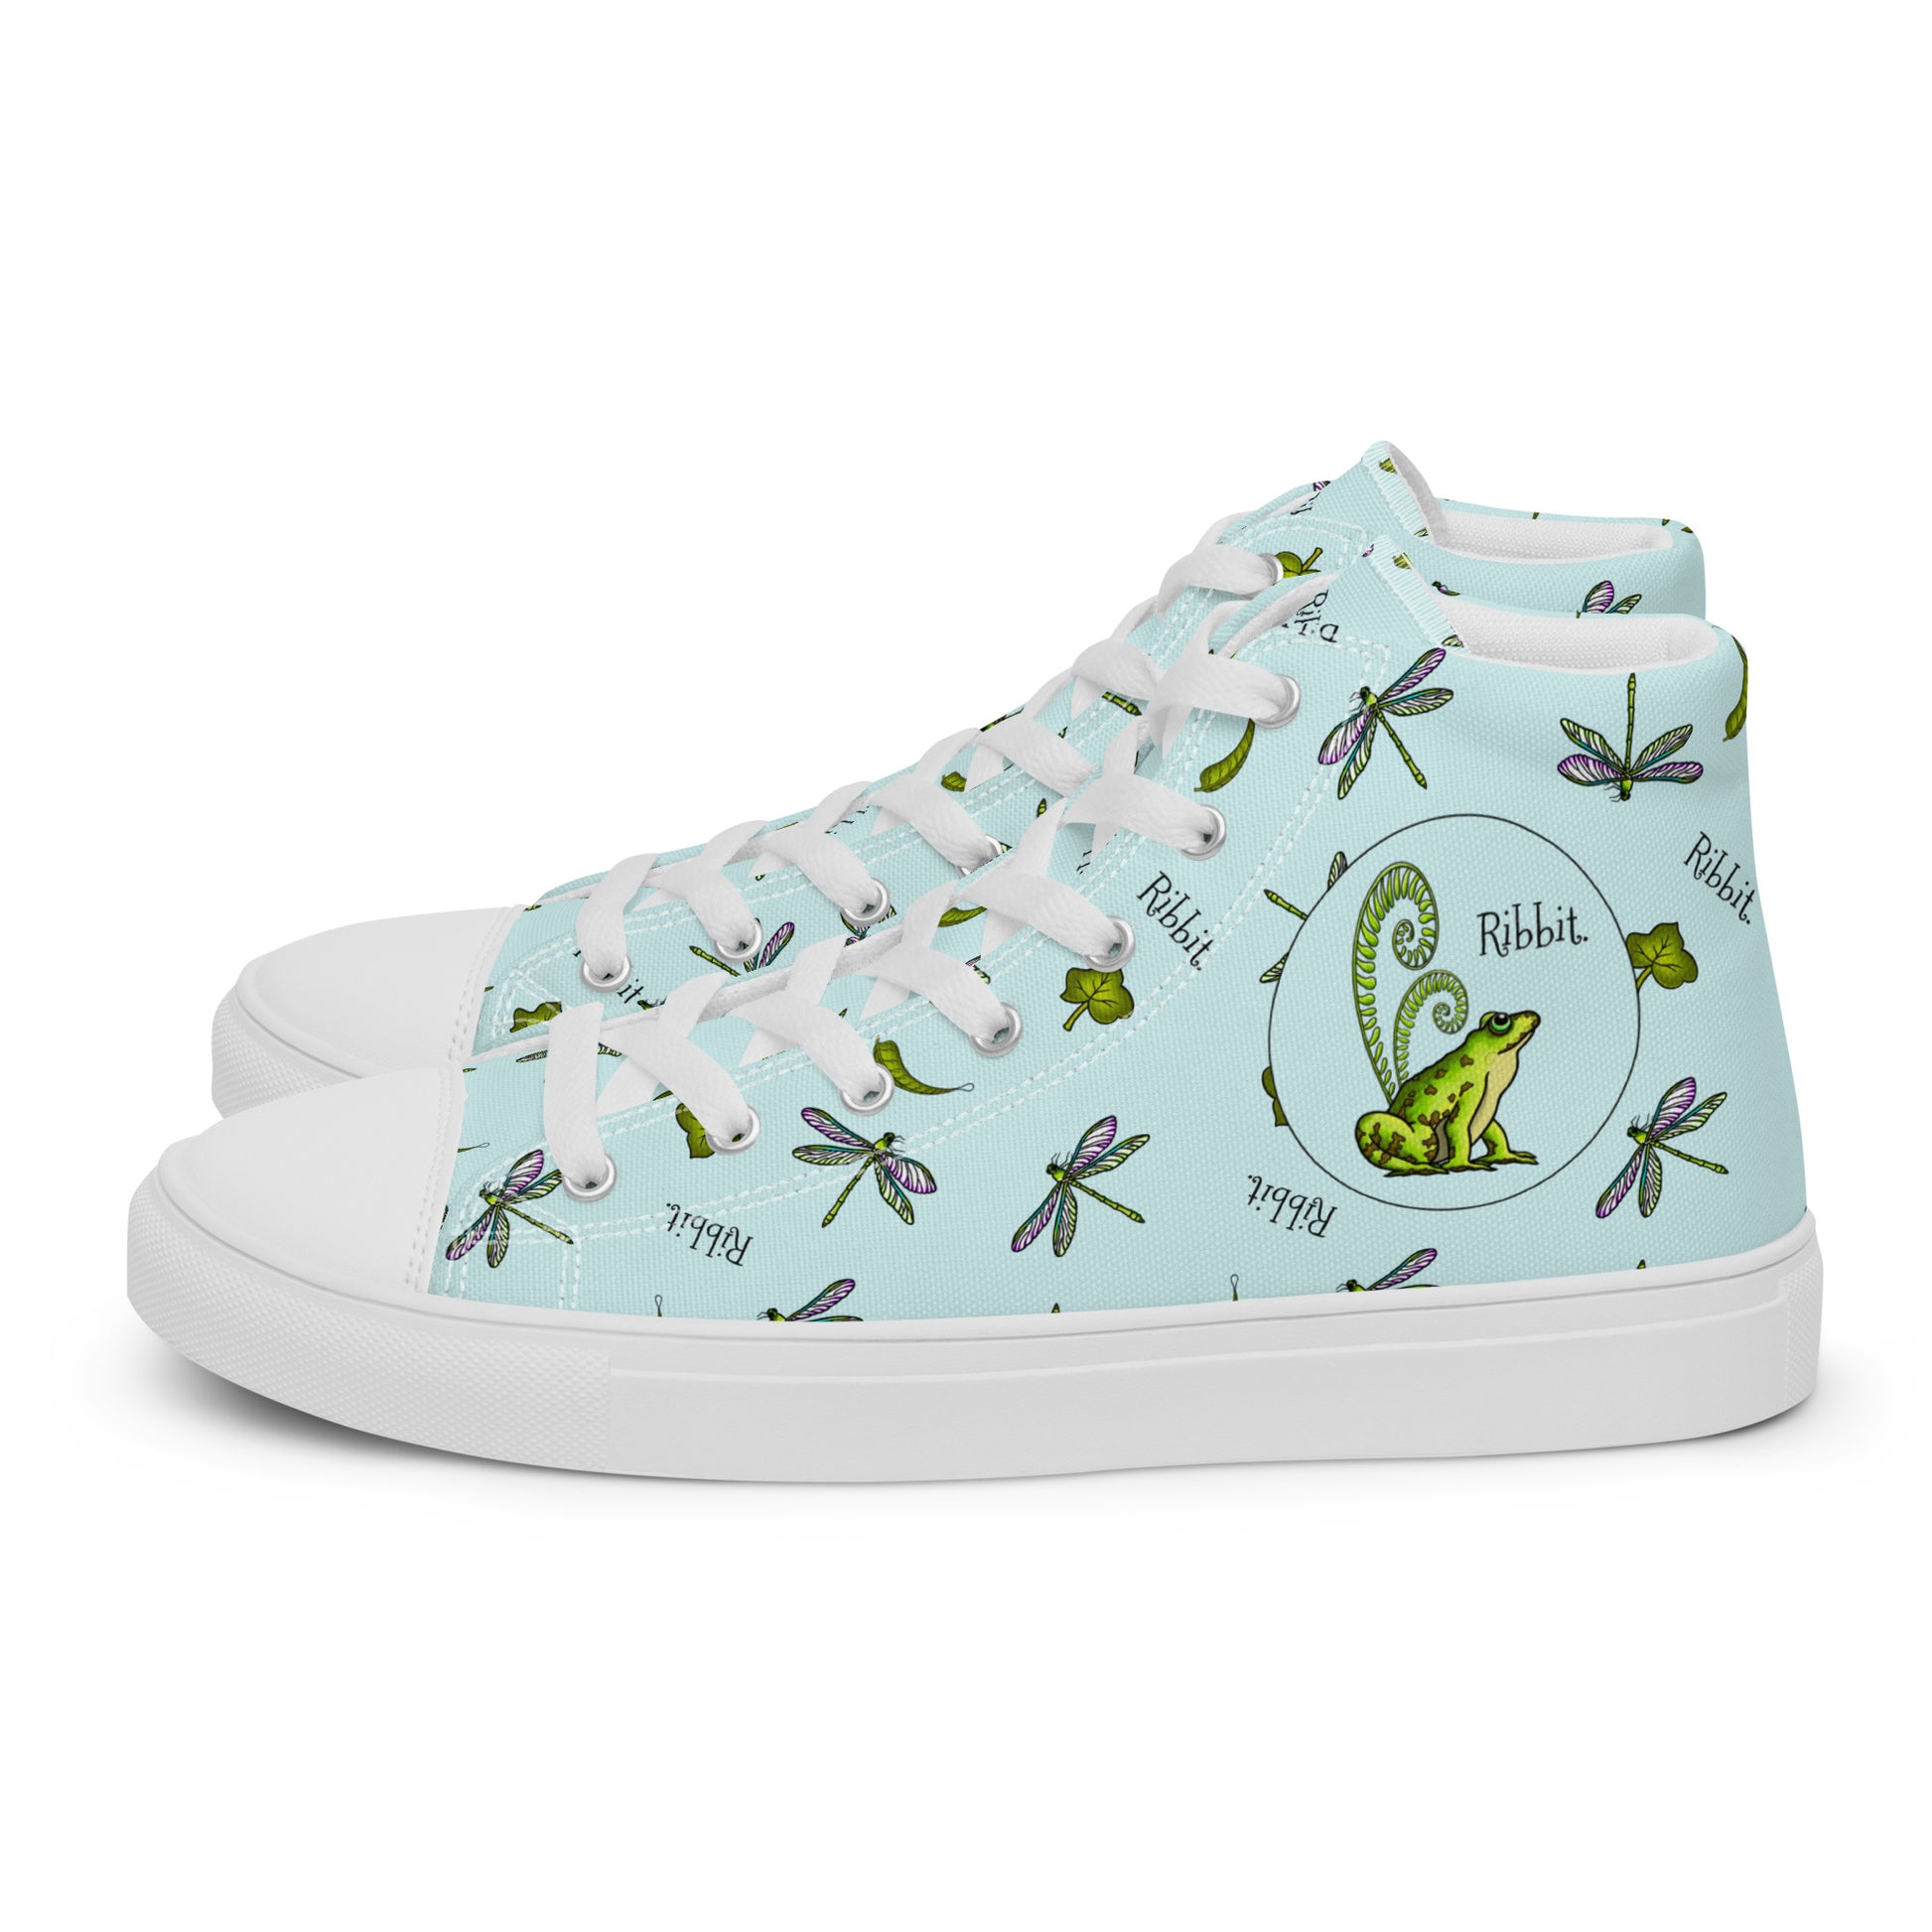 Stormseye Design Pretty Frog Dragonfly high top shoes, white sole, side view